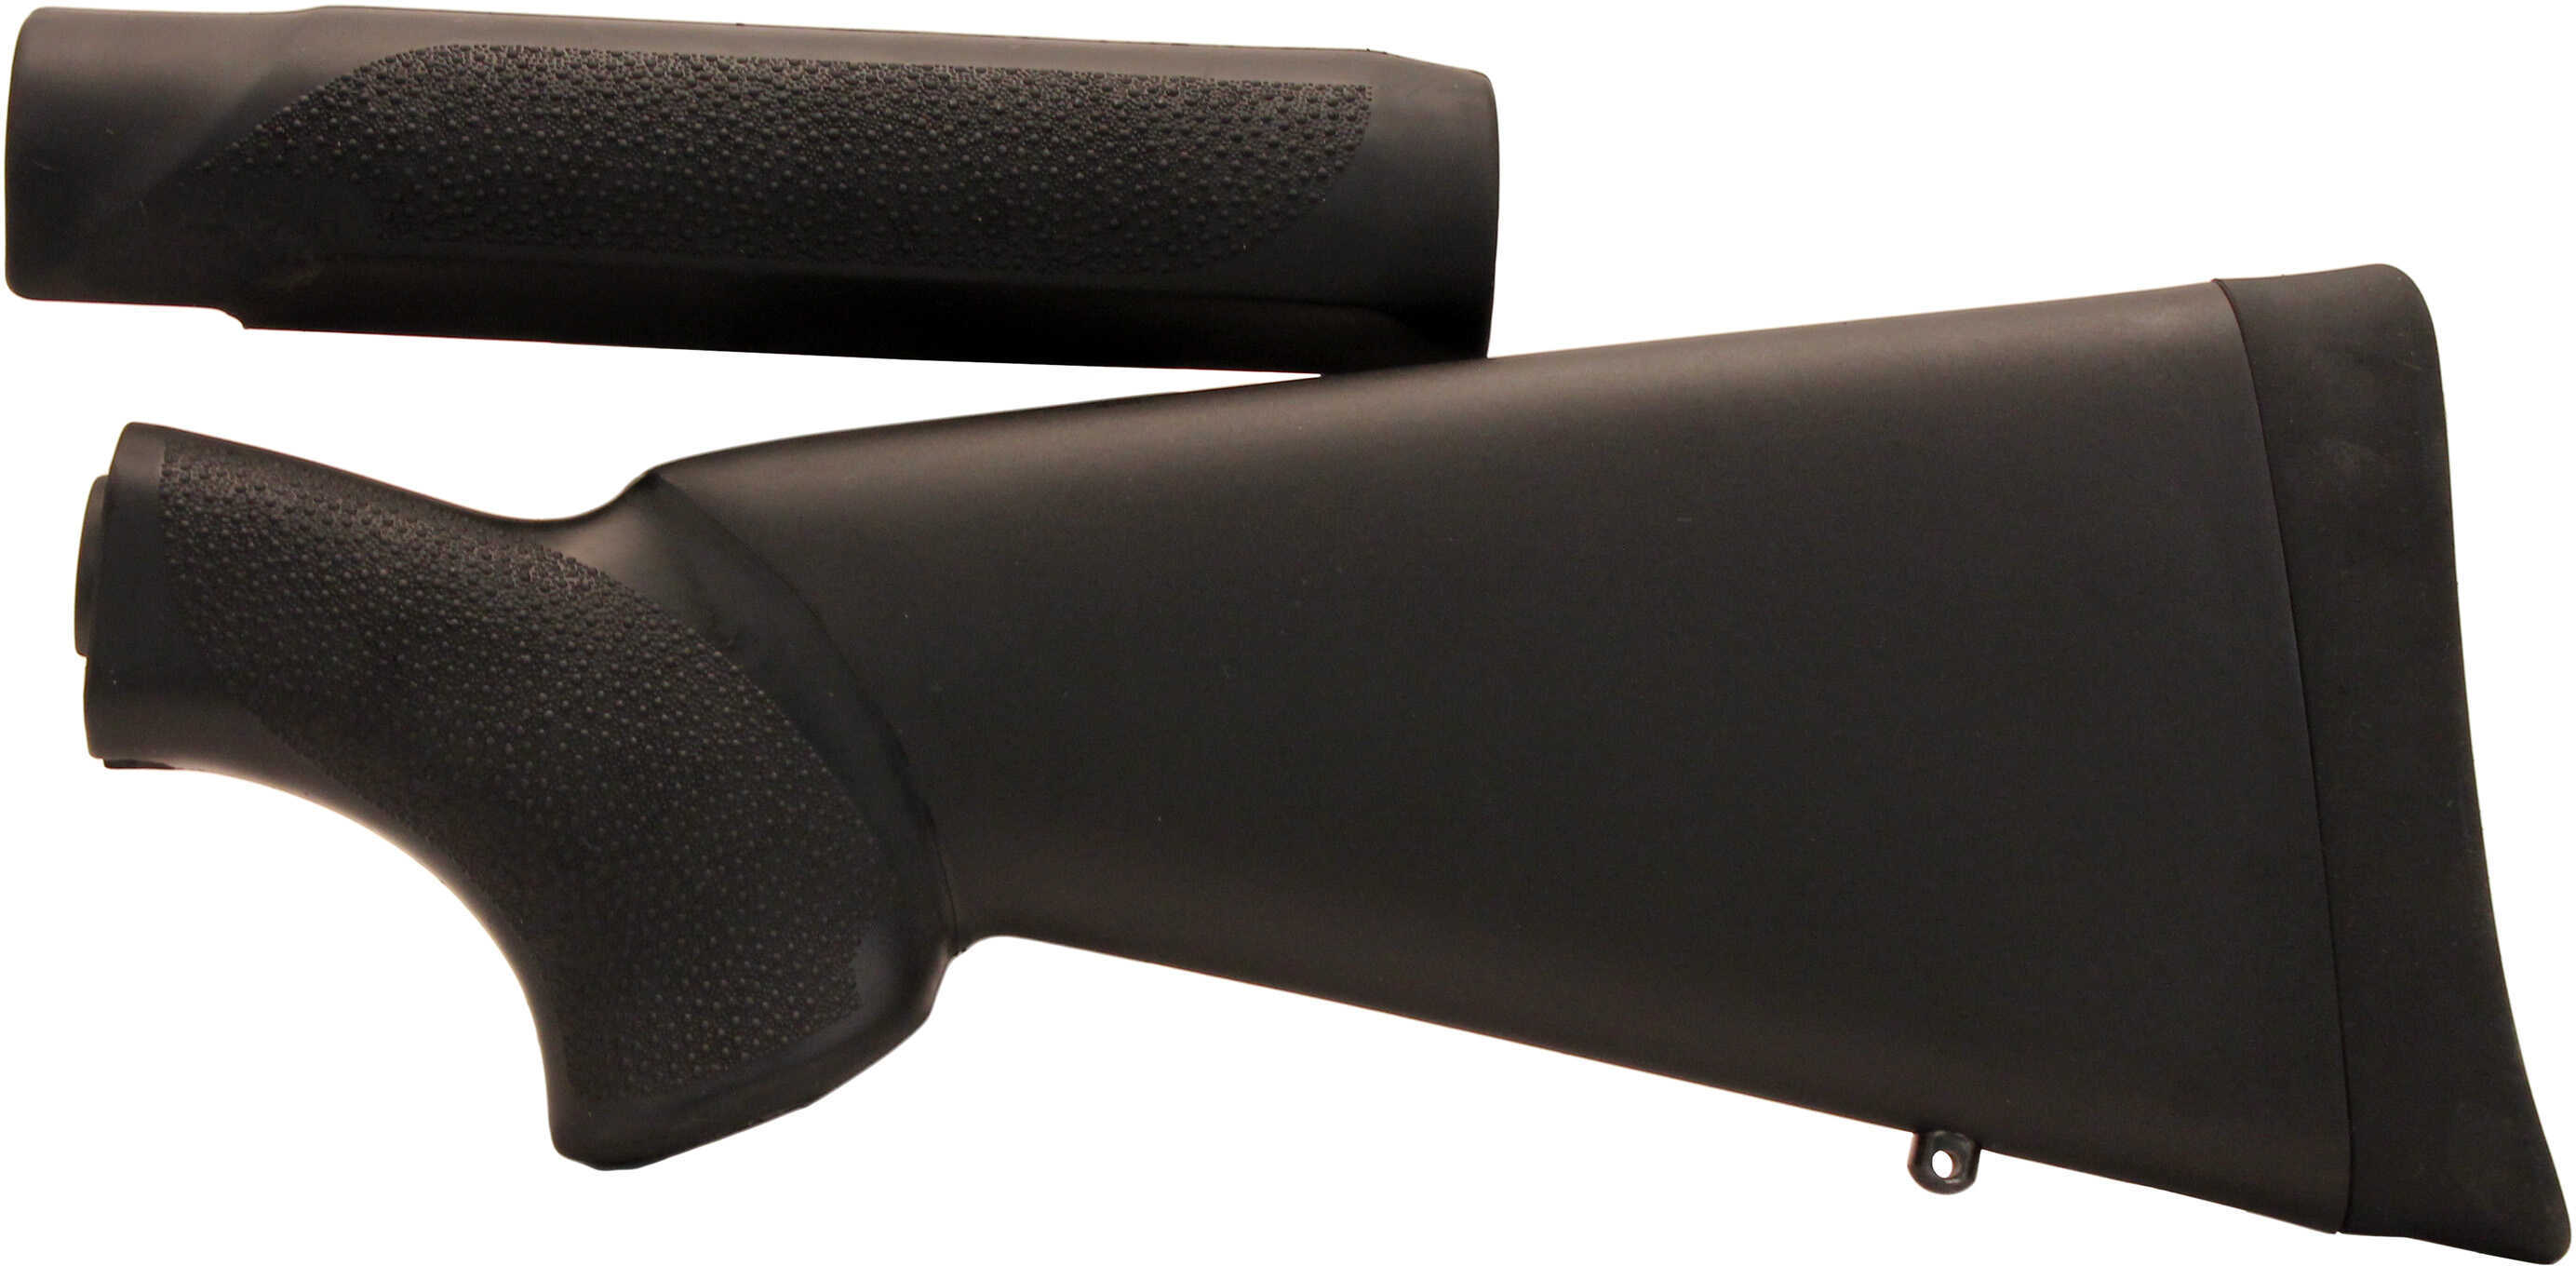 Hogue Mossberg 500 20 Gauge OverMolded Stock w/Forend Black Md: 05017